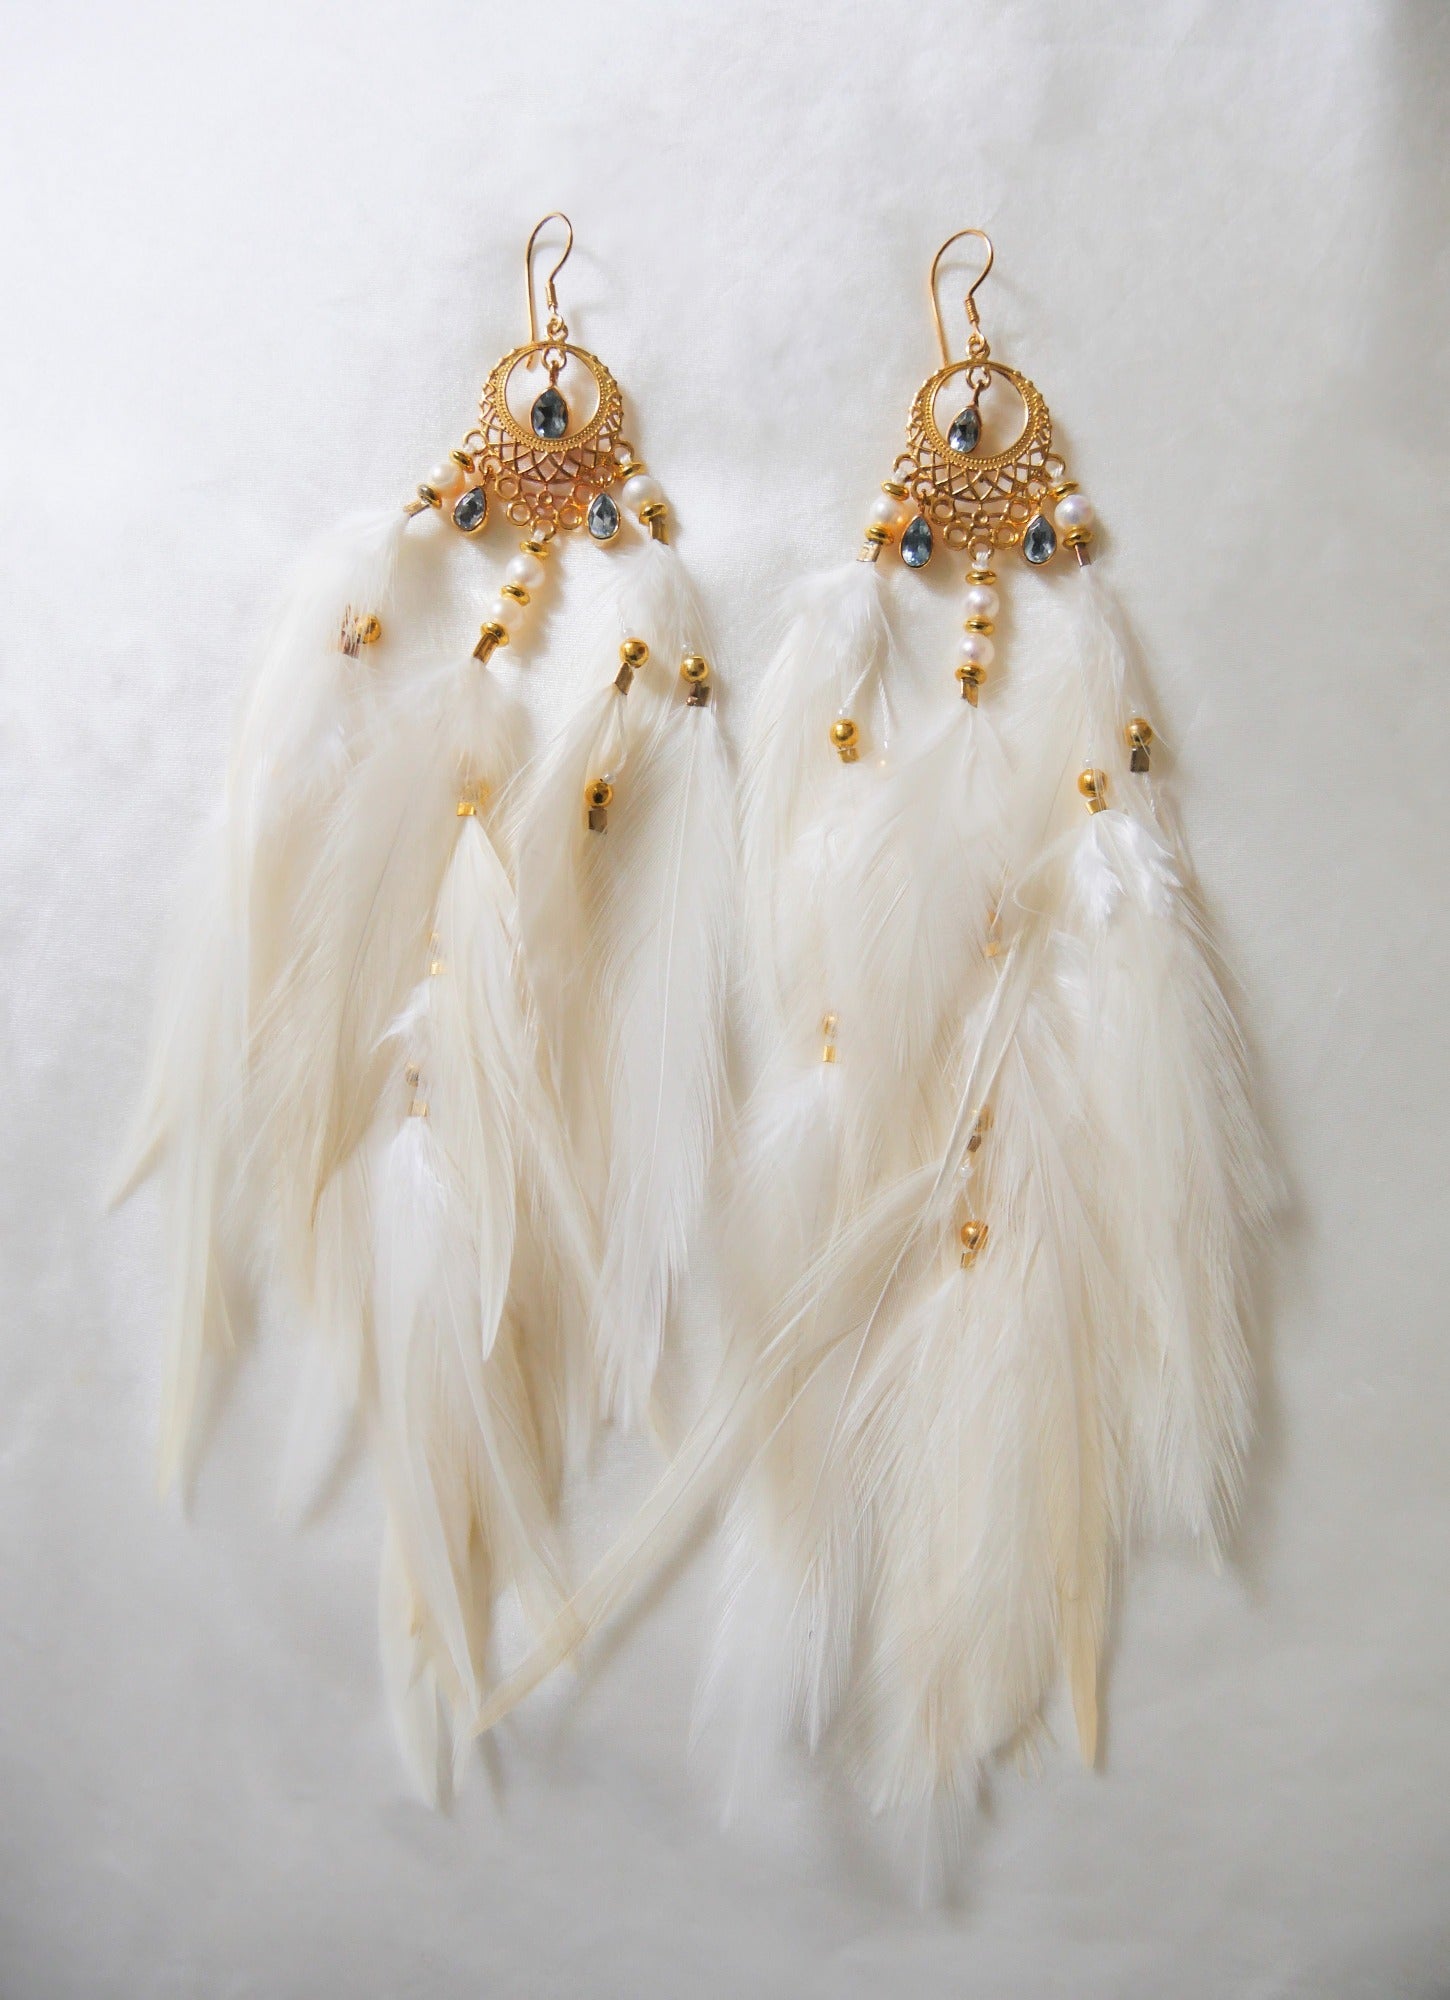 Bohemian Goddess long earrings named My truth sets me free with Blue Topaz crystals and white feathers.